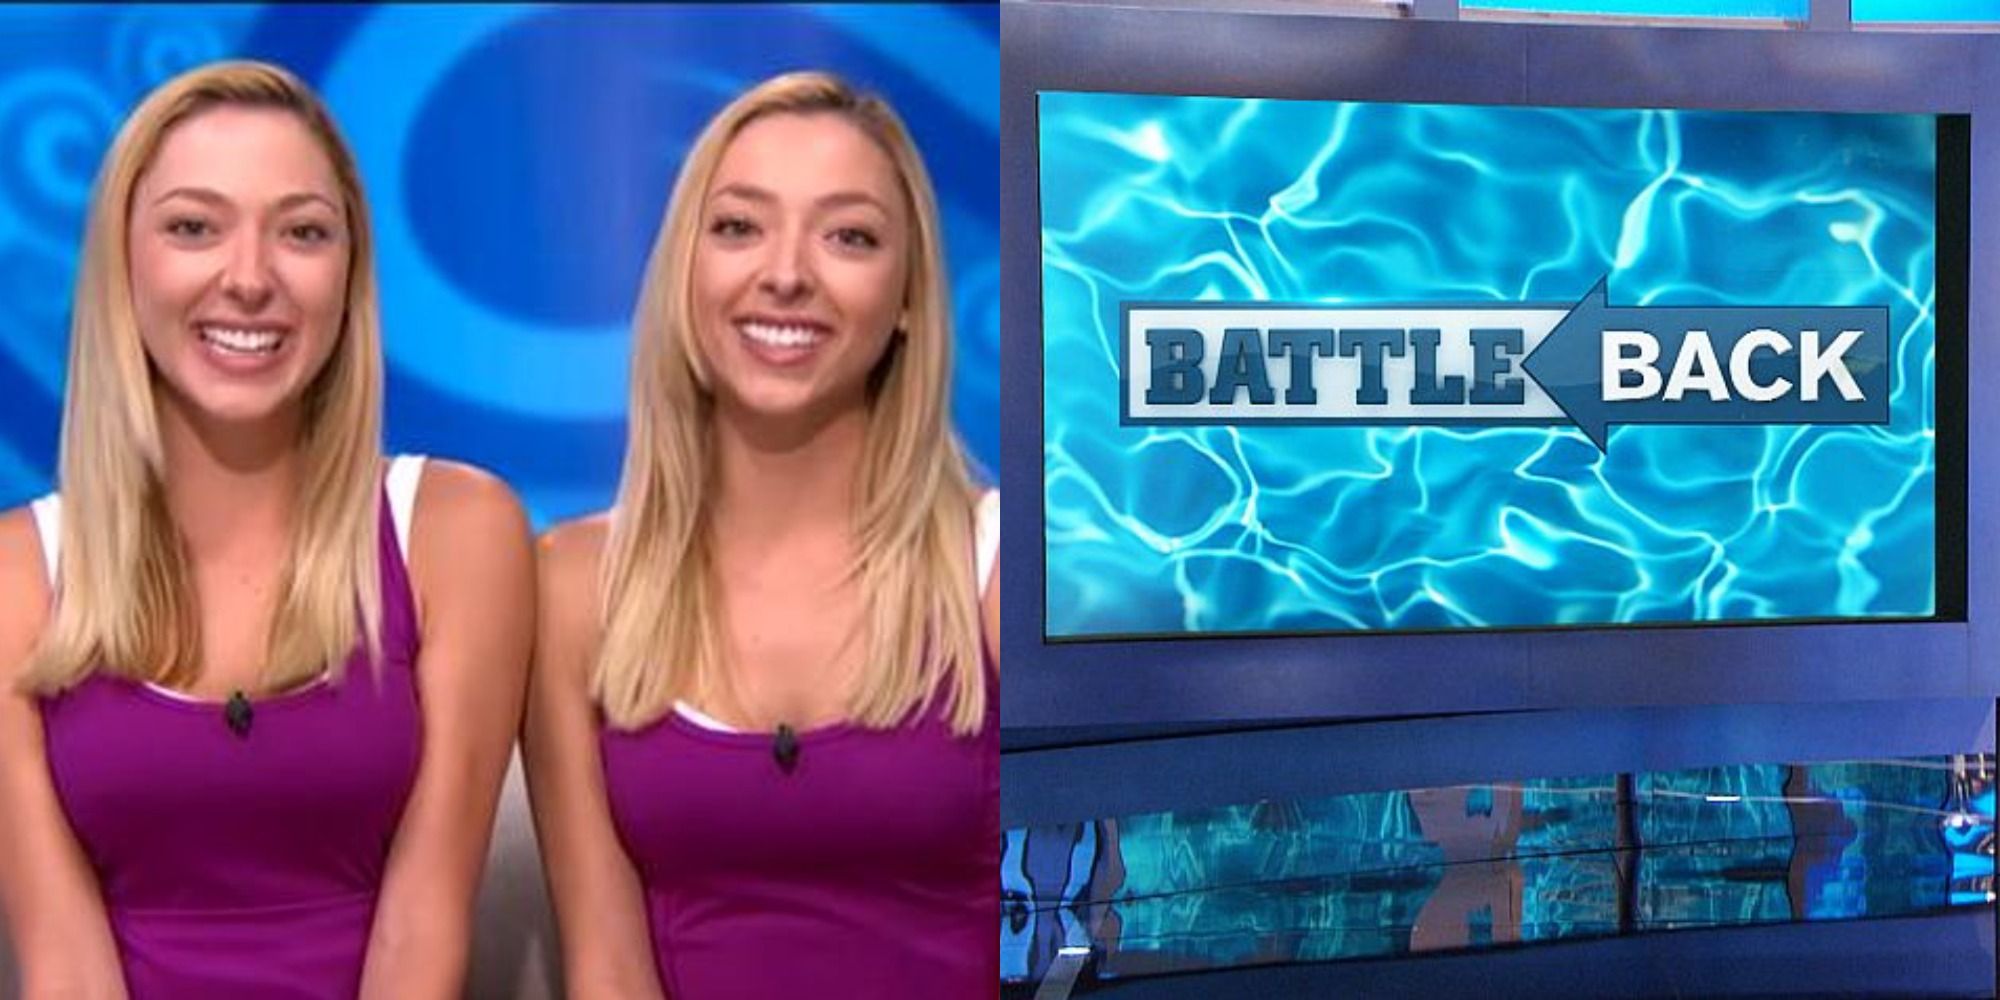 Split image showing the Nolan Twins and the Battle Back logo in Big Brother